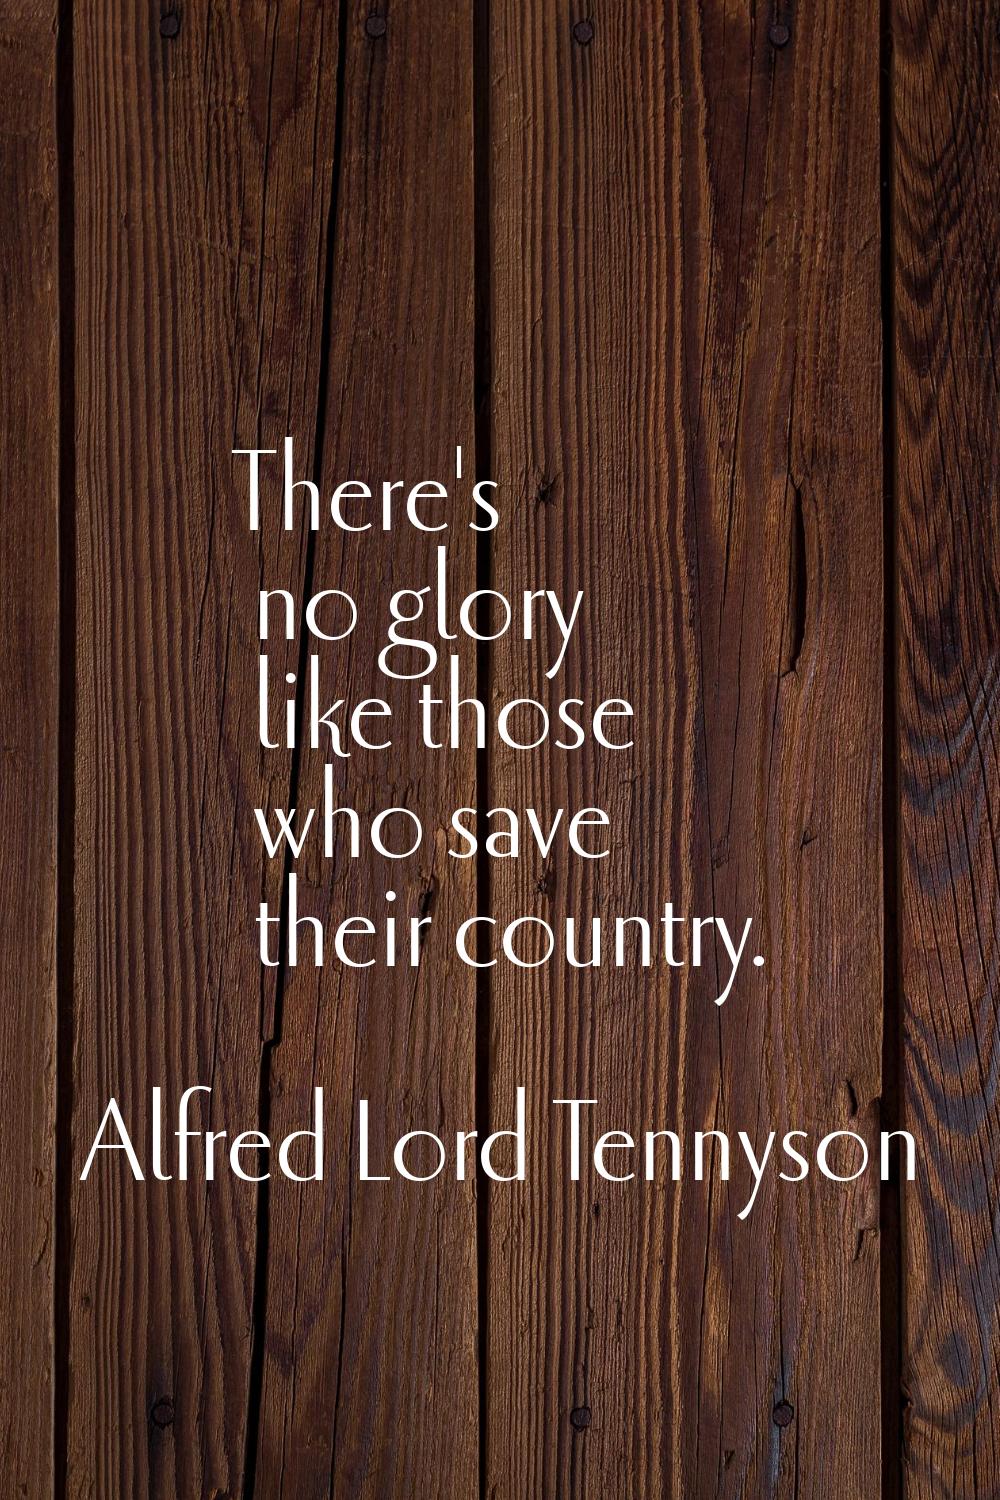 There's no glory like those who save their country.